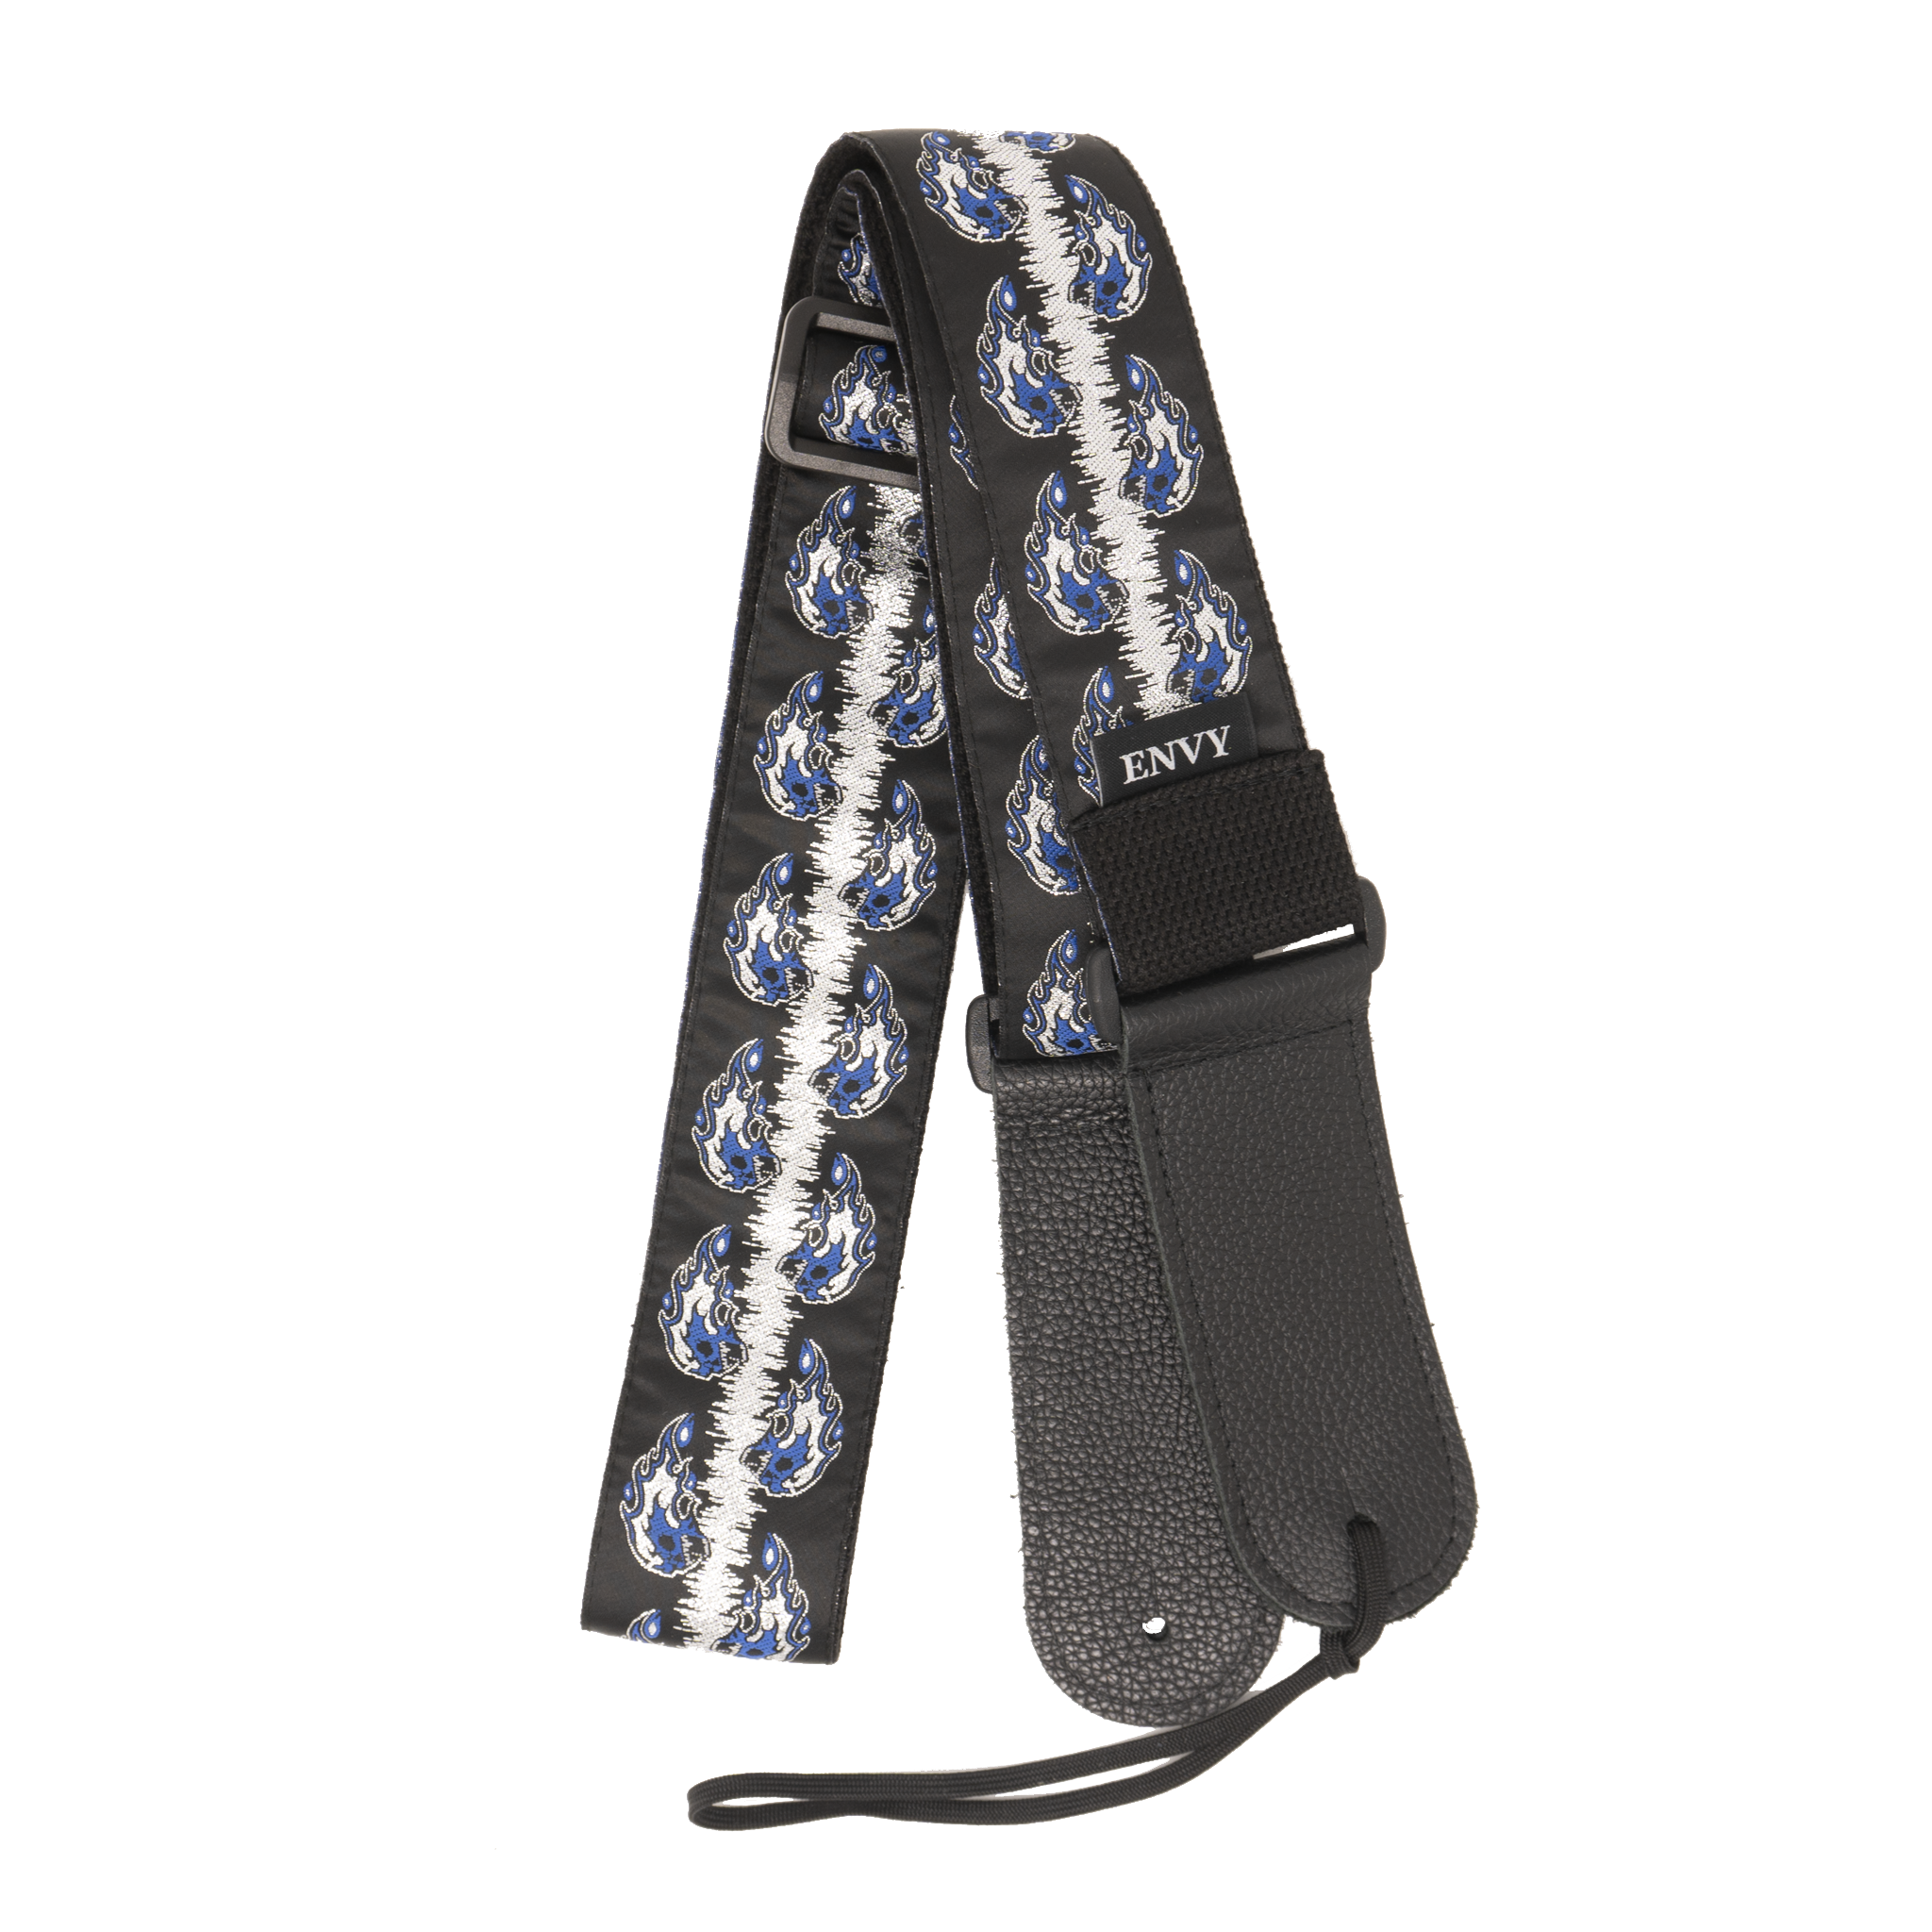 My Fave Guitar Strap in Blue Flaming Skulls